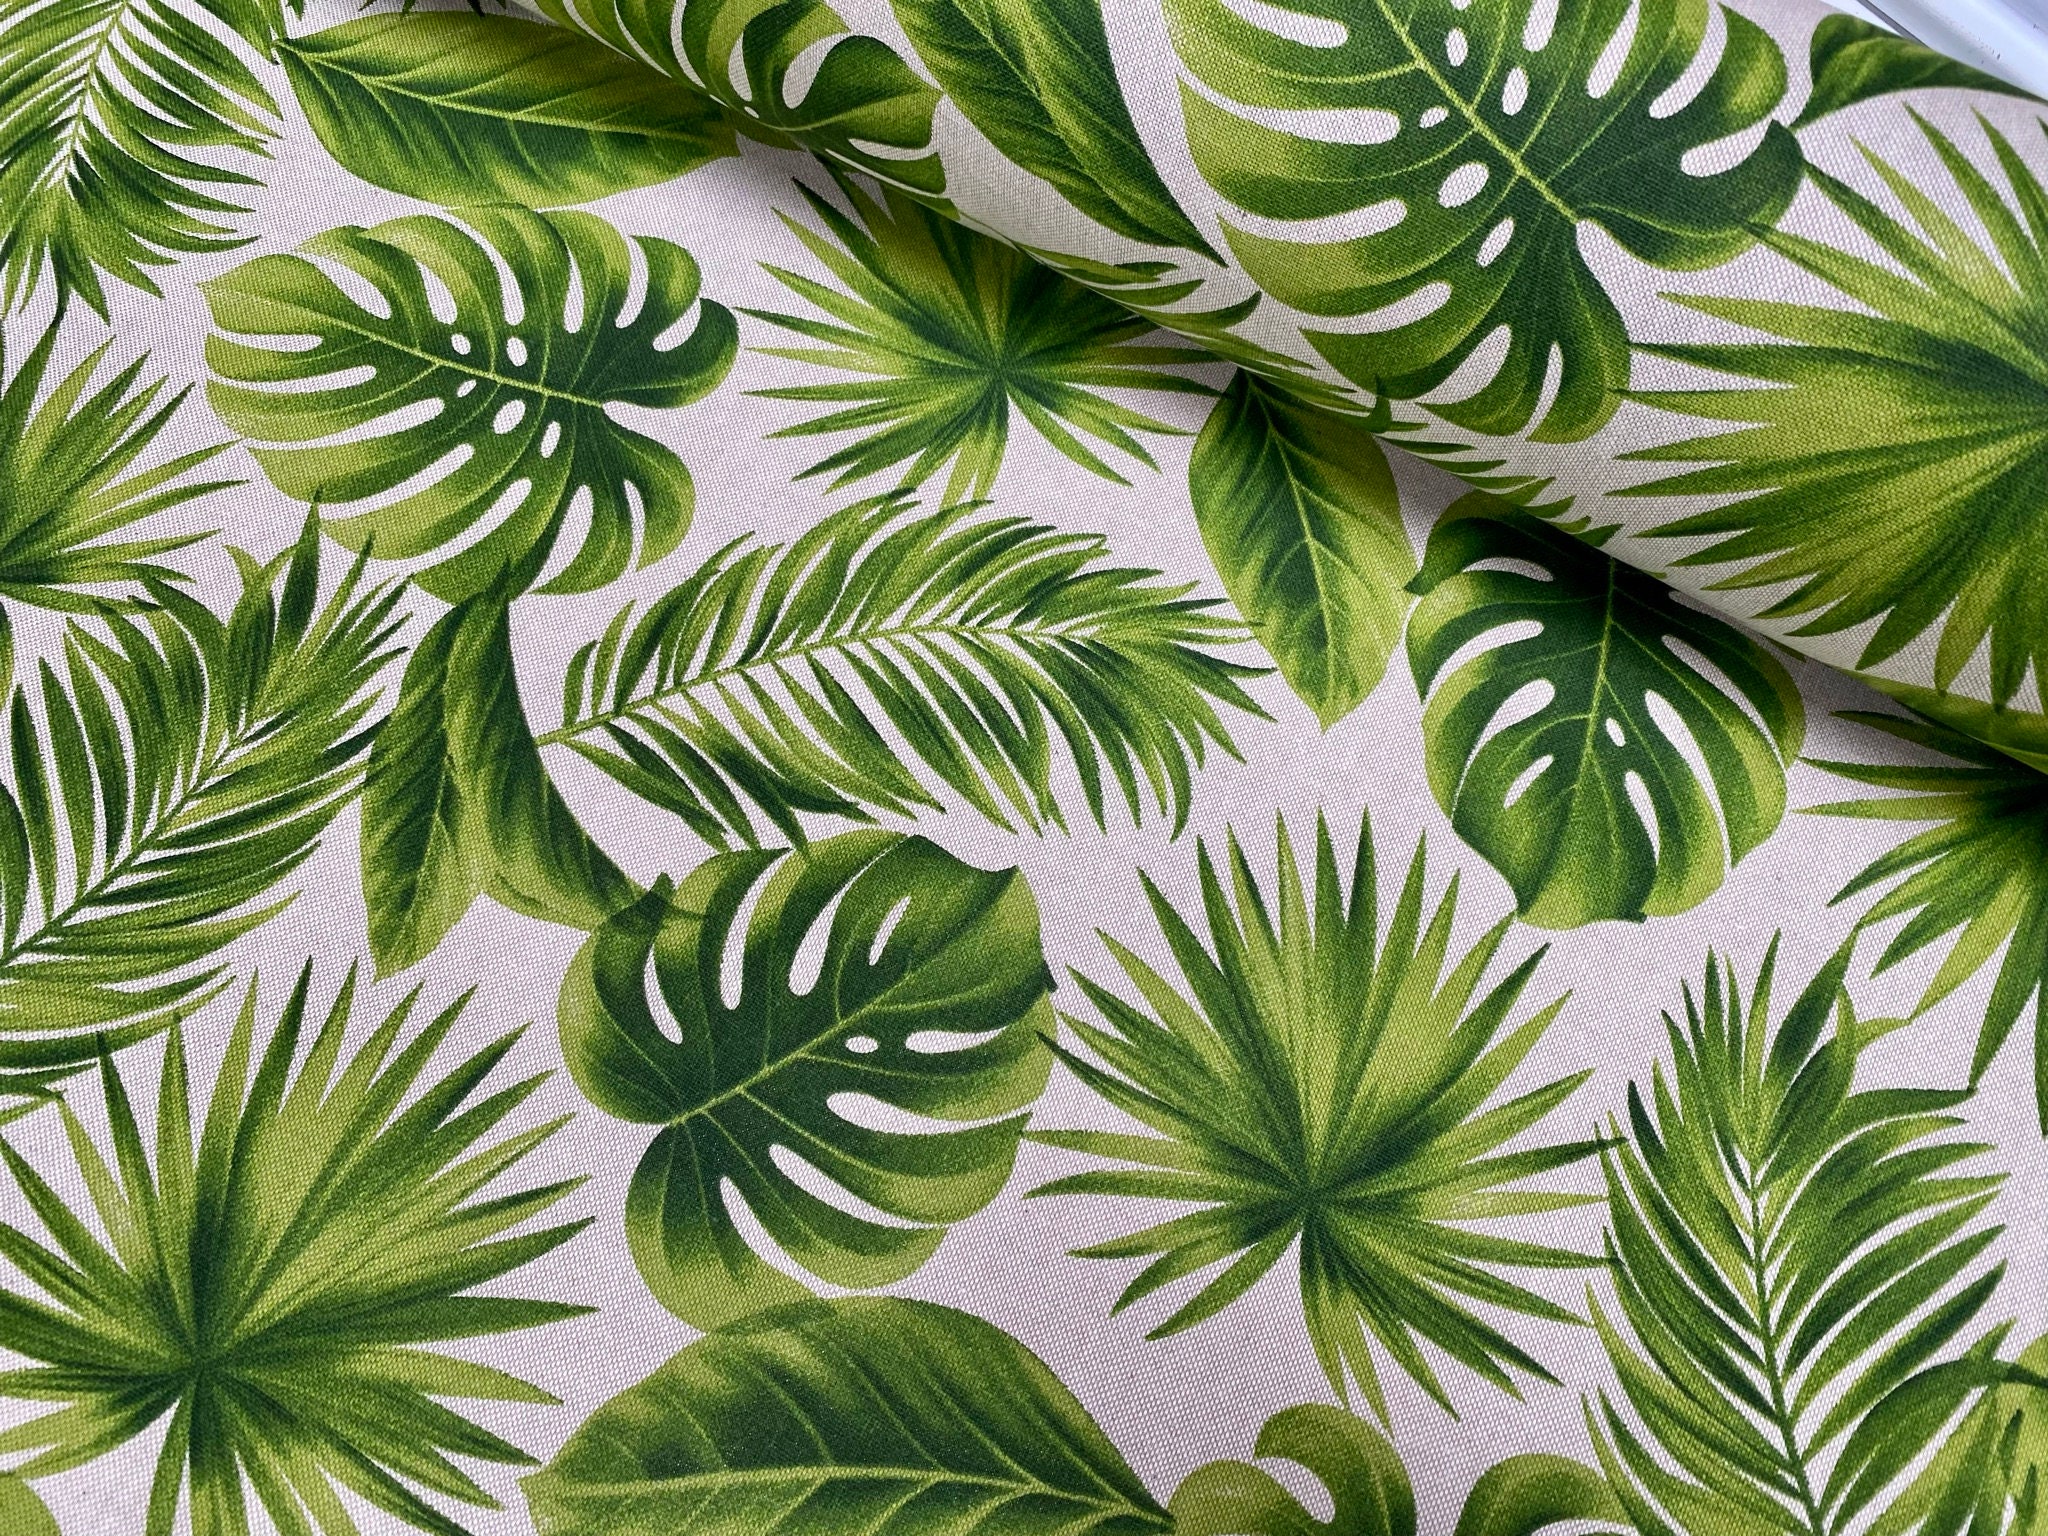 Wide Leaves - Leaf Curtain Green Upholstery Palm Home Look 55 Tropical Linen for Fabric Material Etsy Canvas 140cm Decor